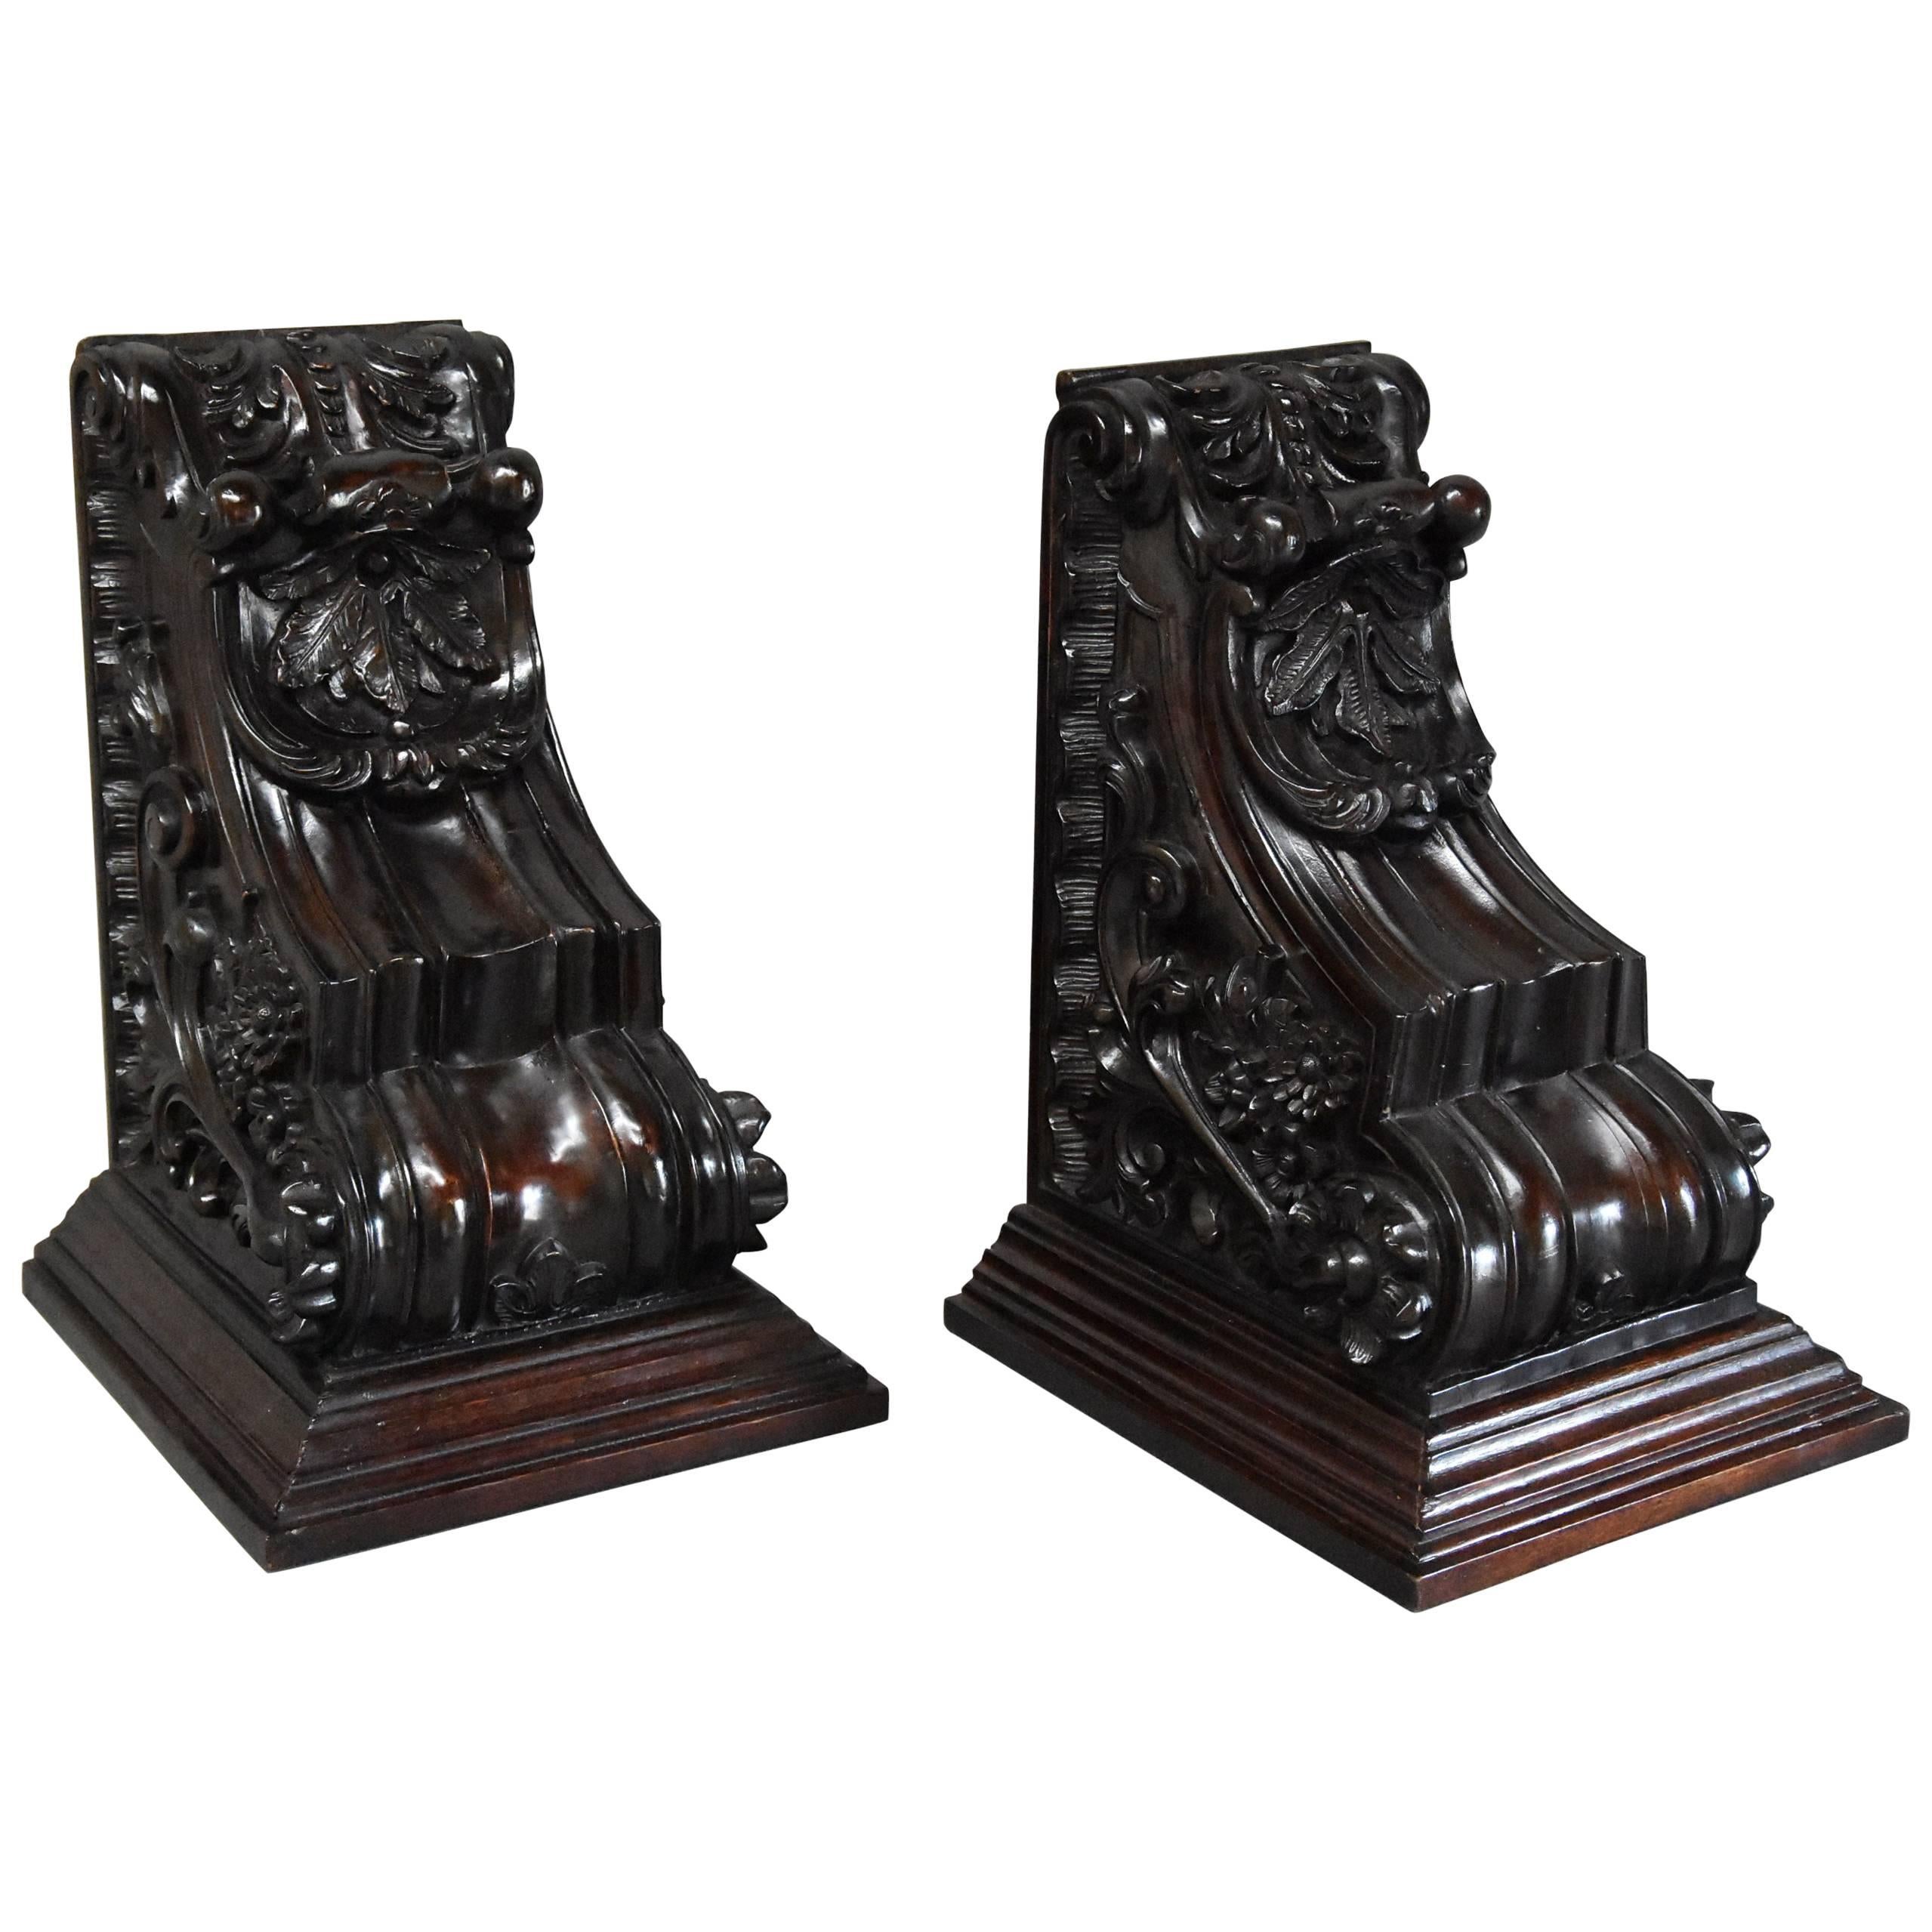 Large Pair of 19th Century Decorative Carved Mahogany Architectural Brackets